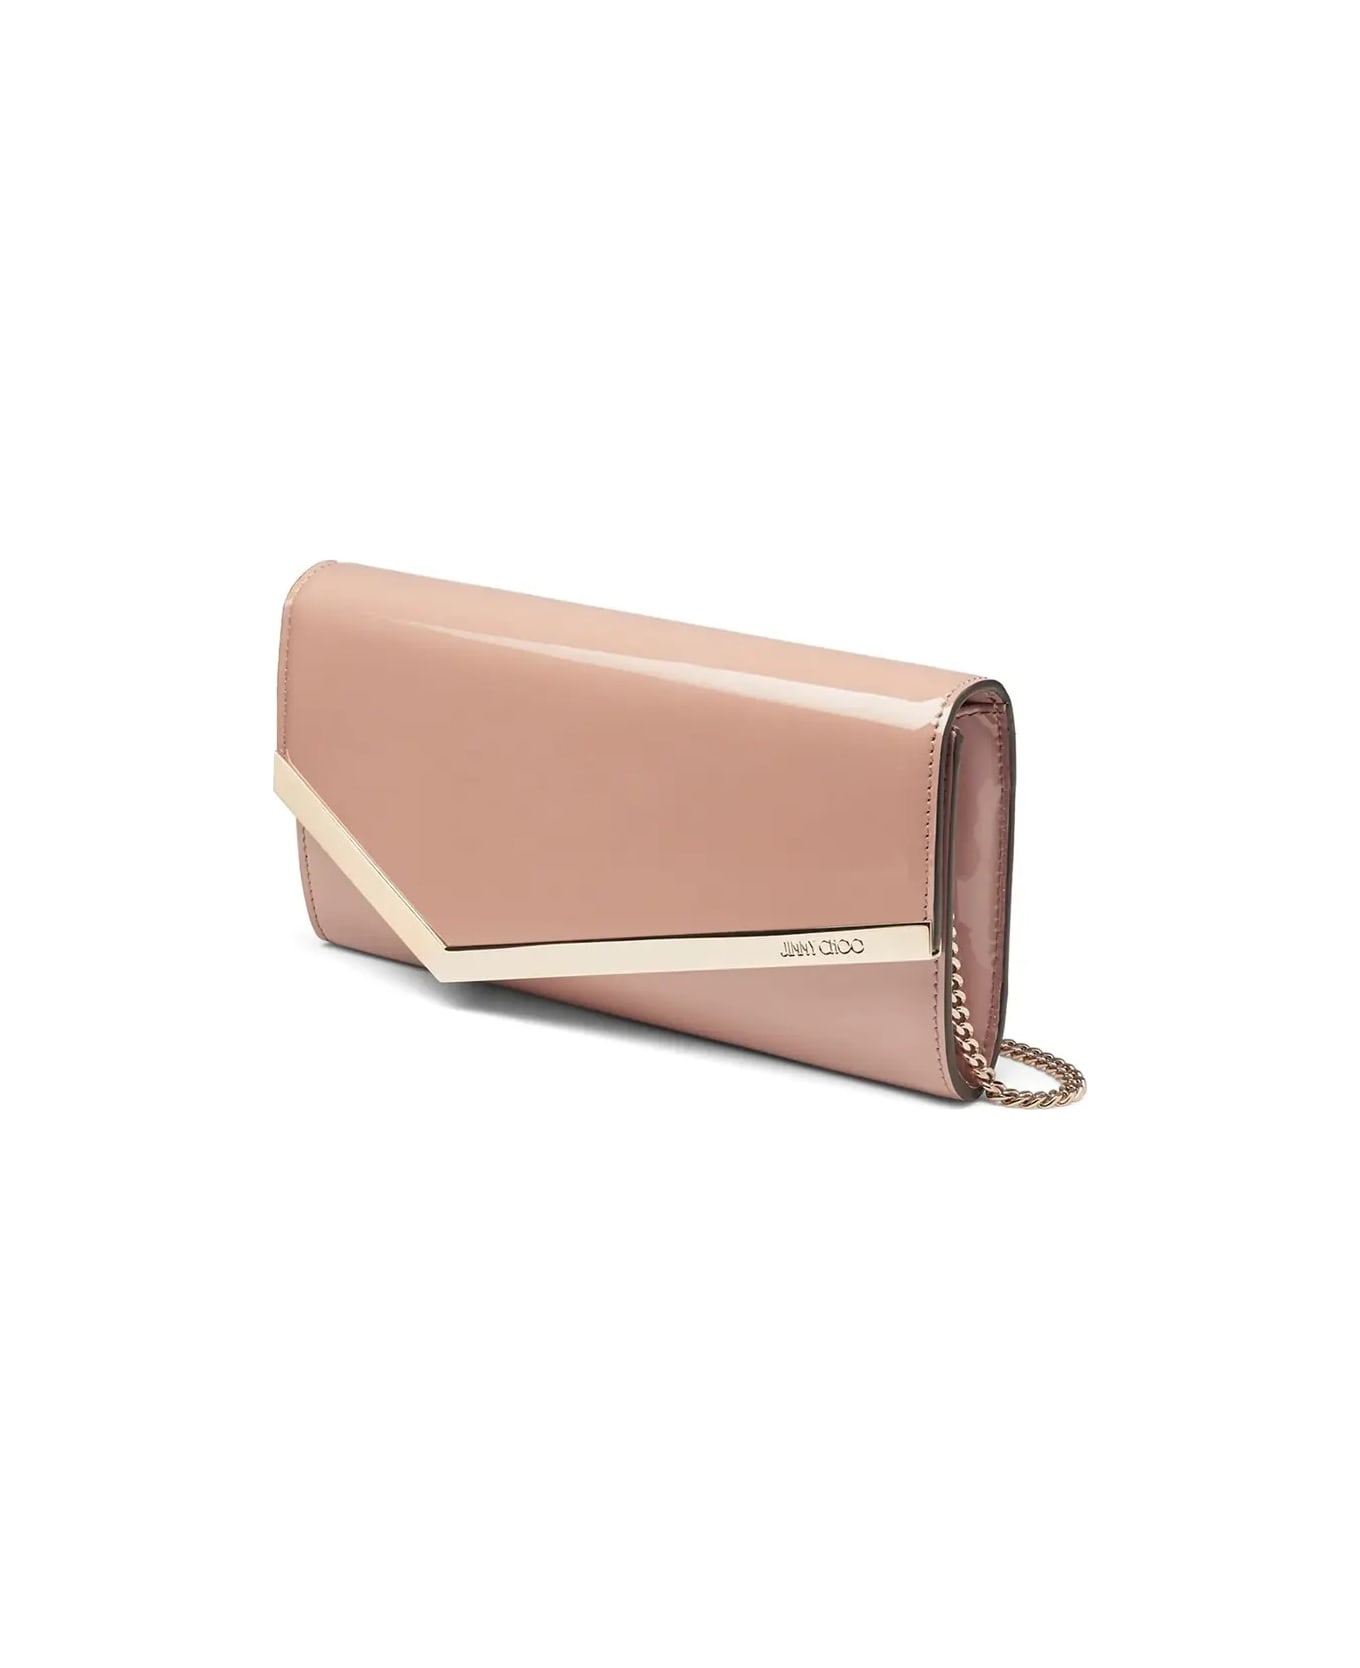 Jimmy Choo Emmie Clutch Bag In Ballet Pink Patent Leather - Pink